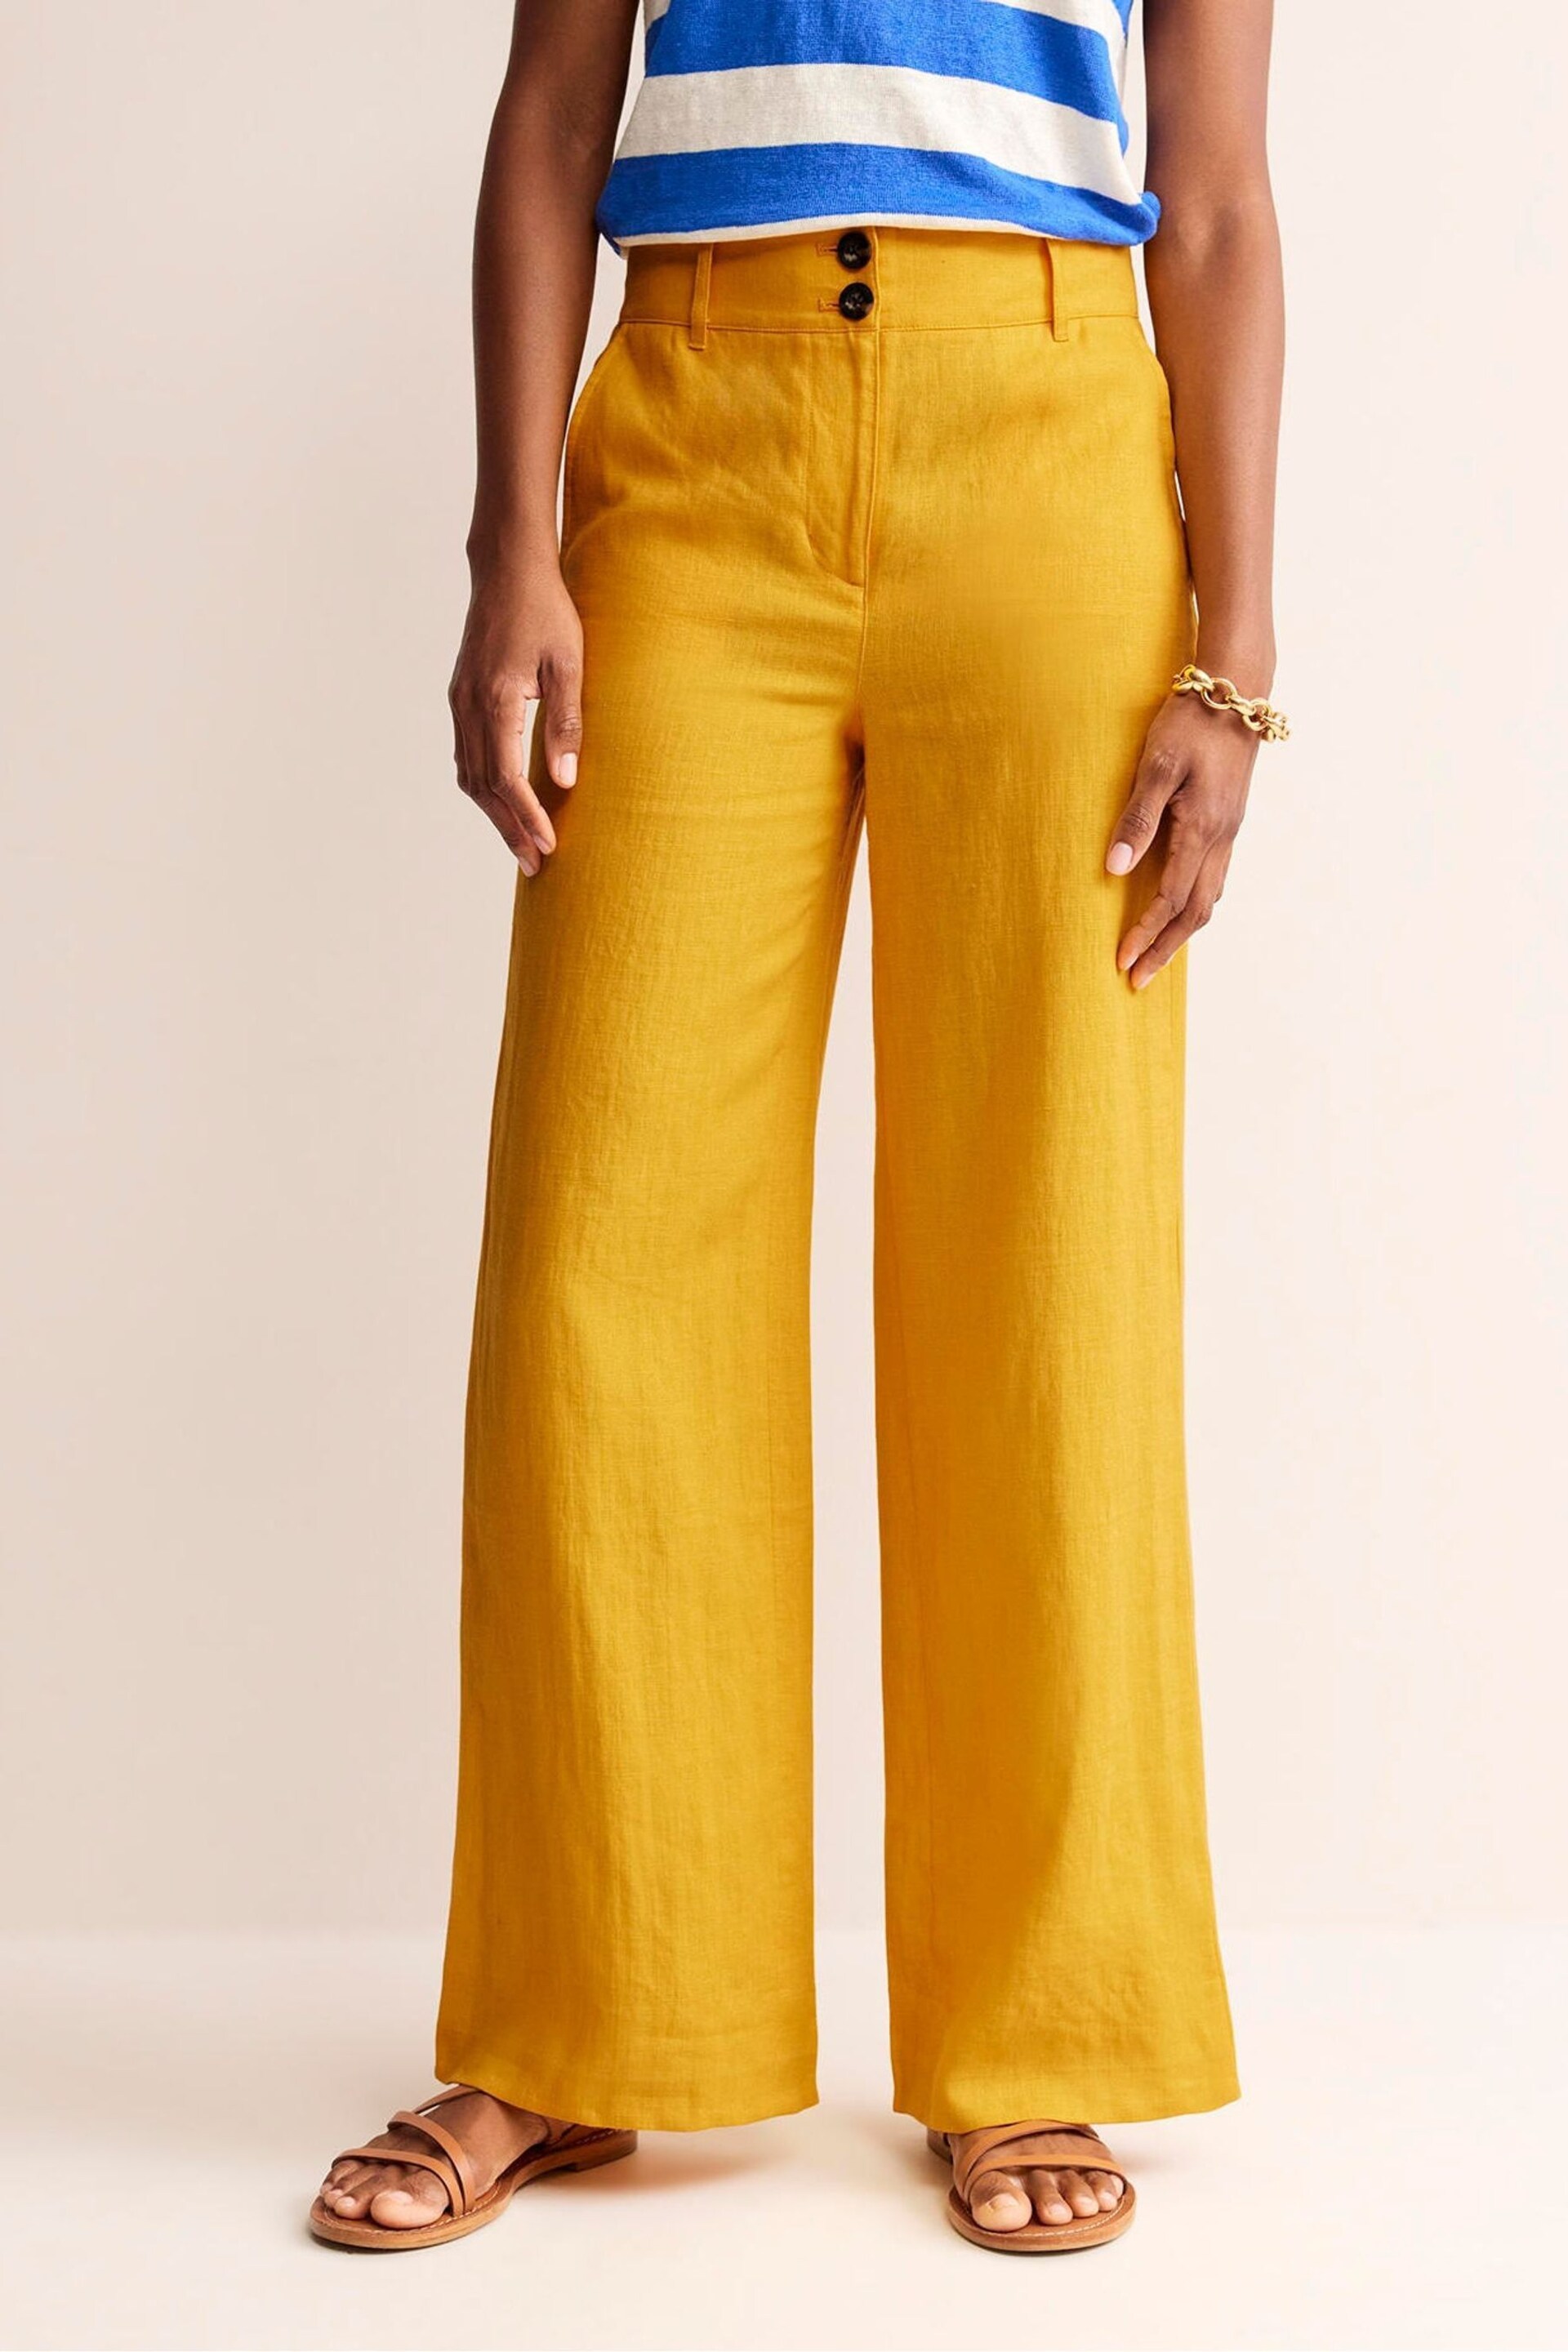 Boden Yellow Petite Westbourne Linen Trousers - Image 4 of 5